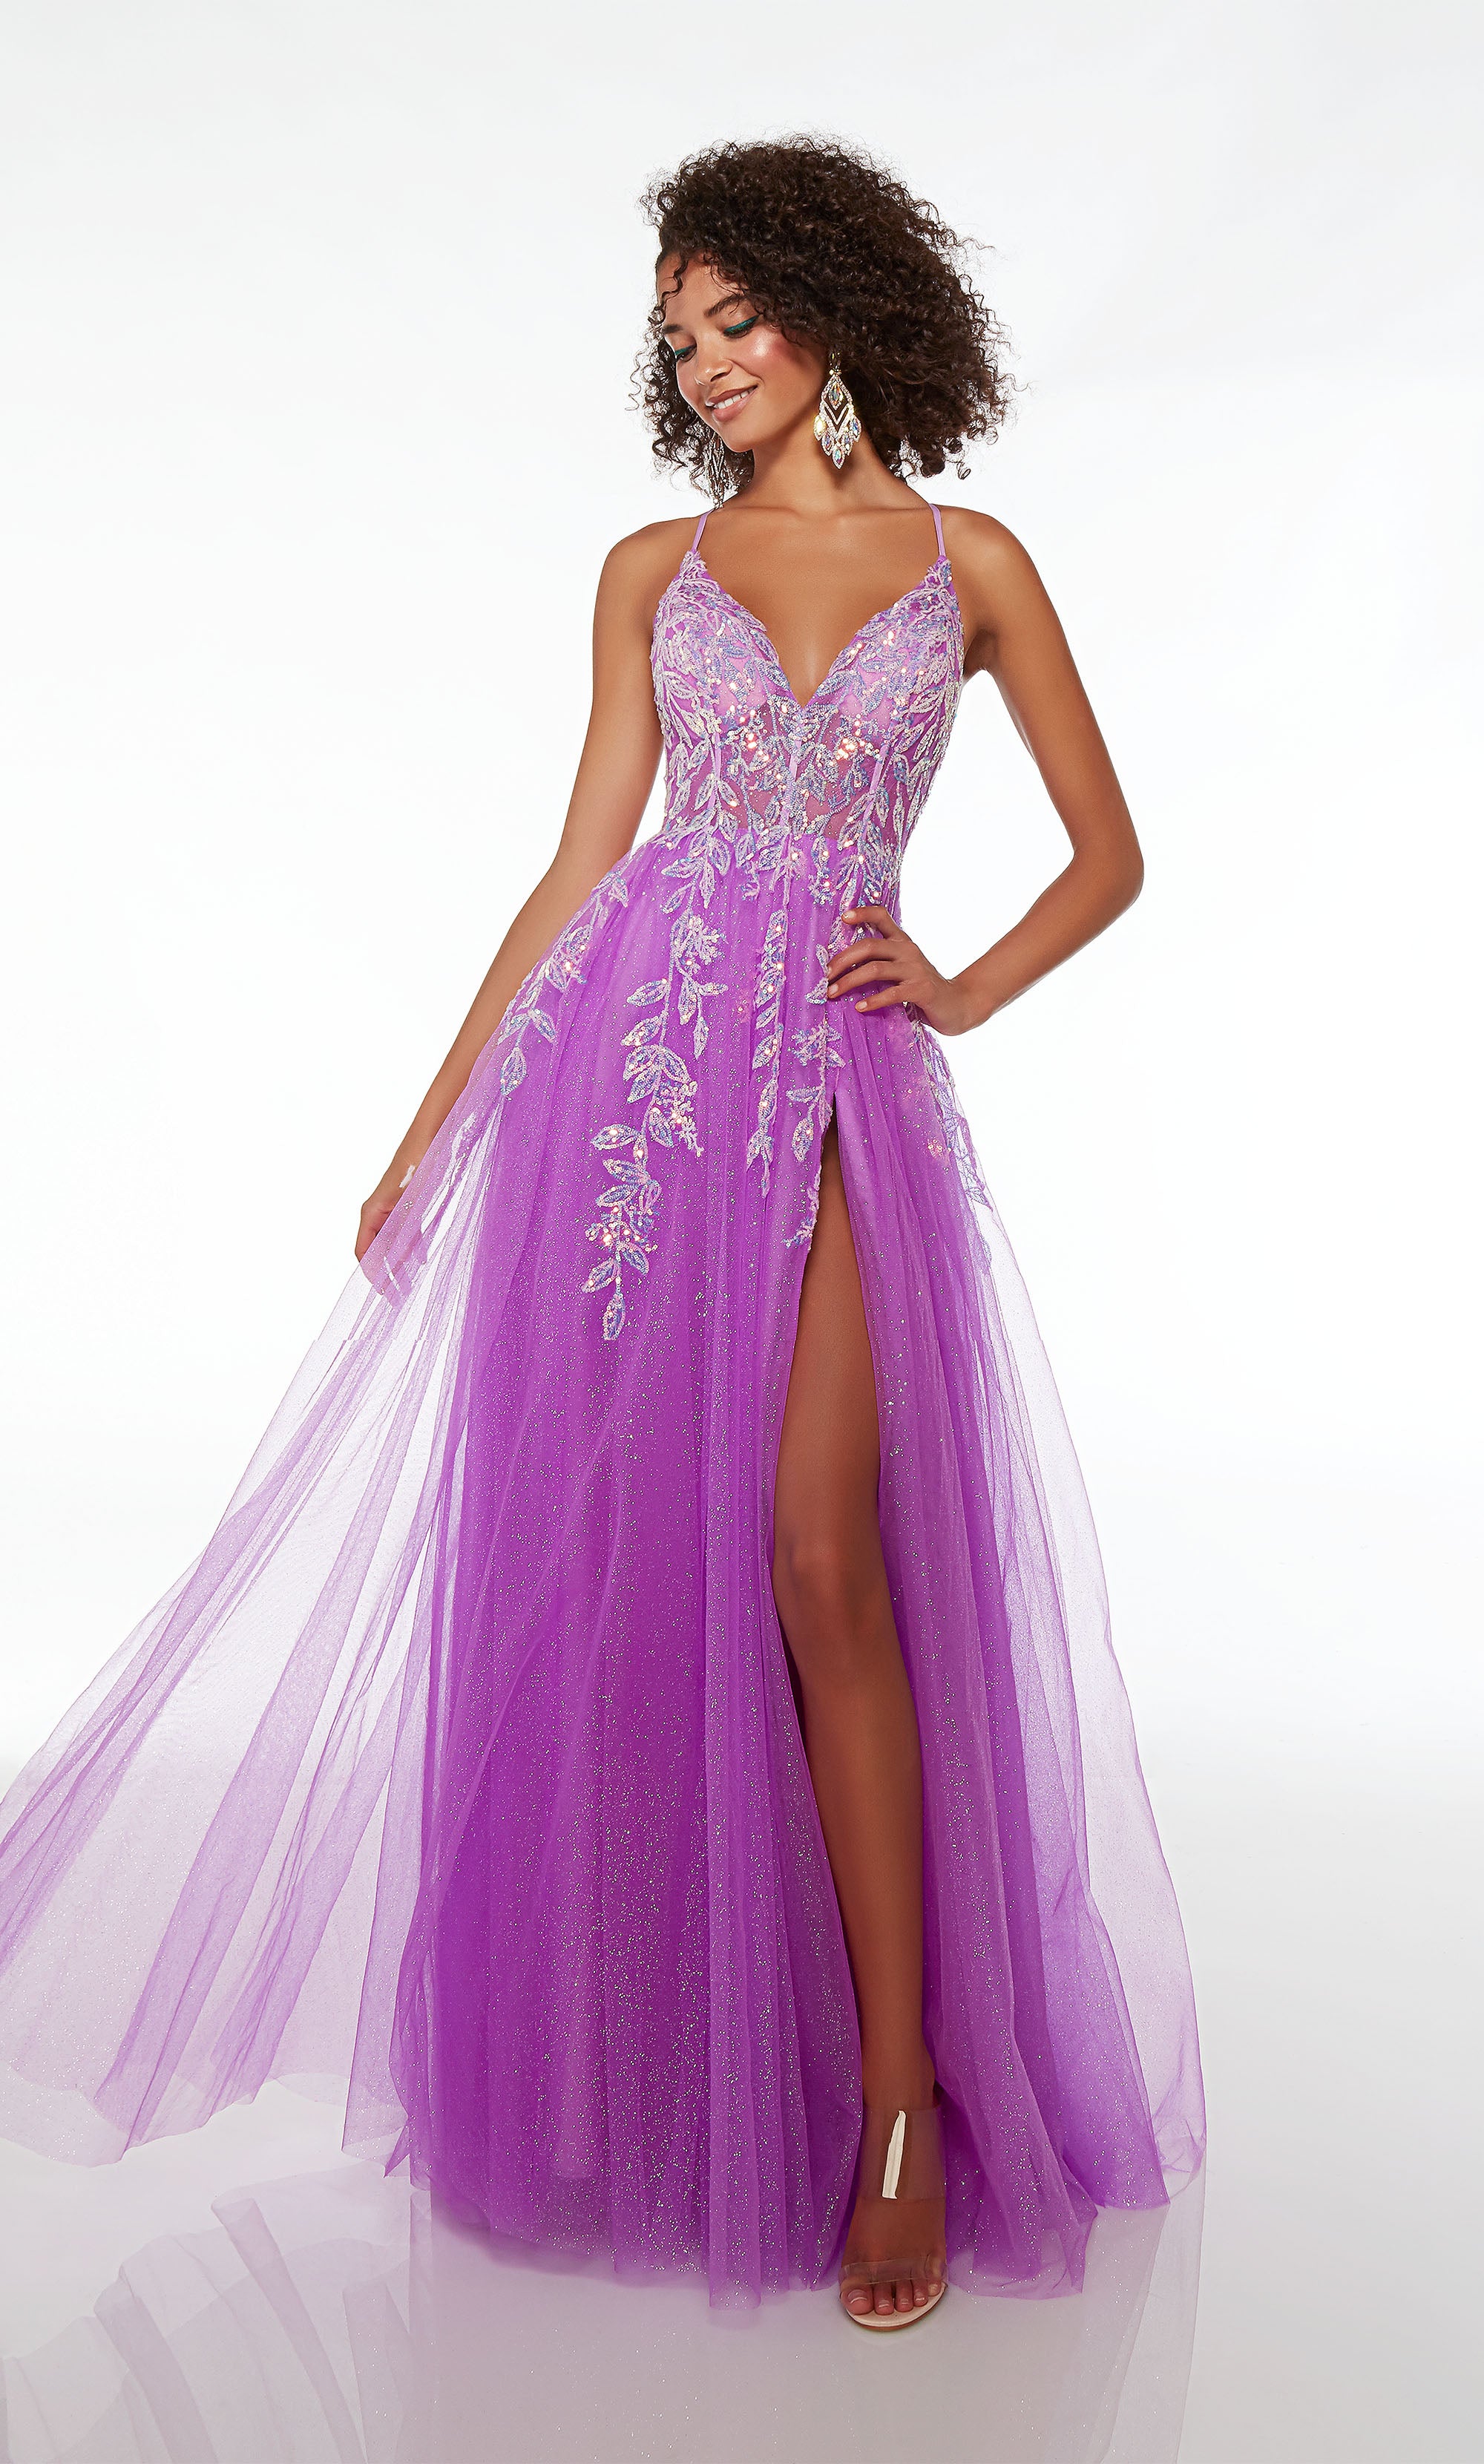 Purple prom dress: V neckline, sheer top with floral lace, high side slit, crisscross open back, in stunning glitter tulle fabric.